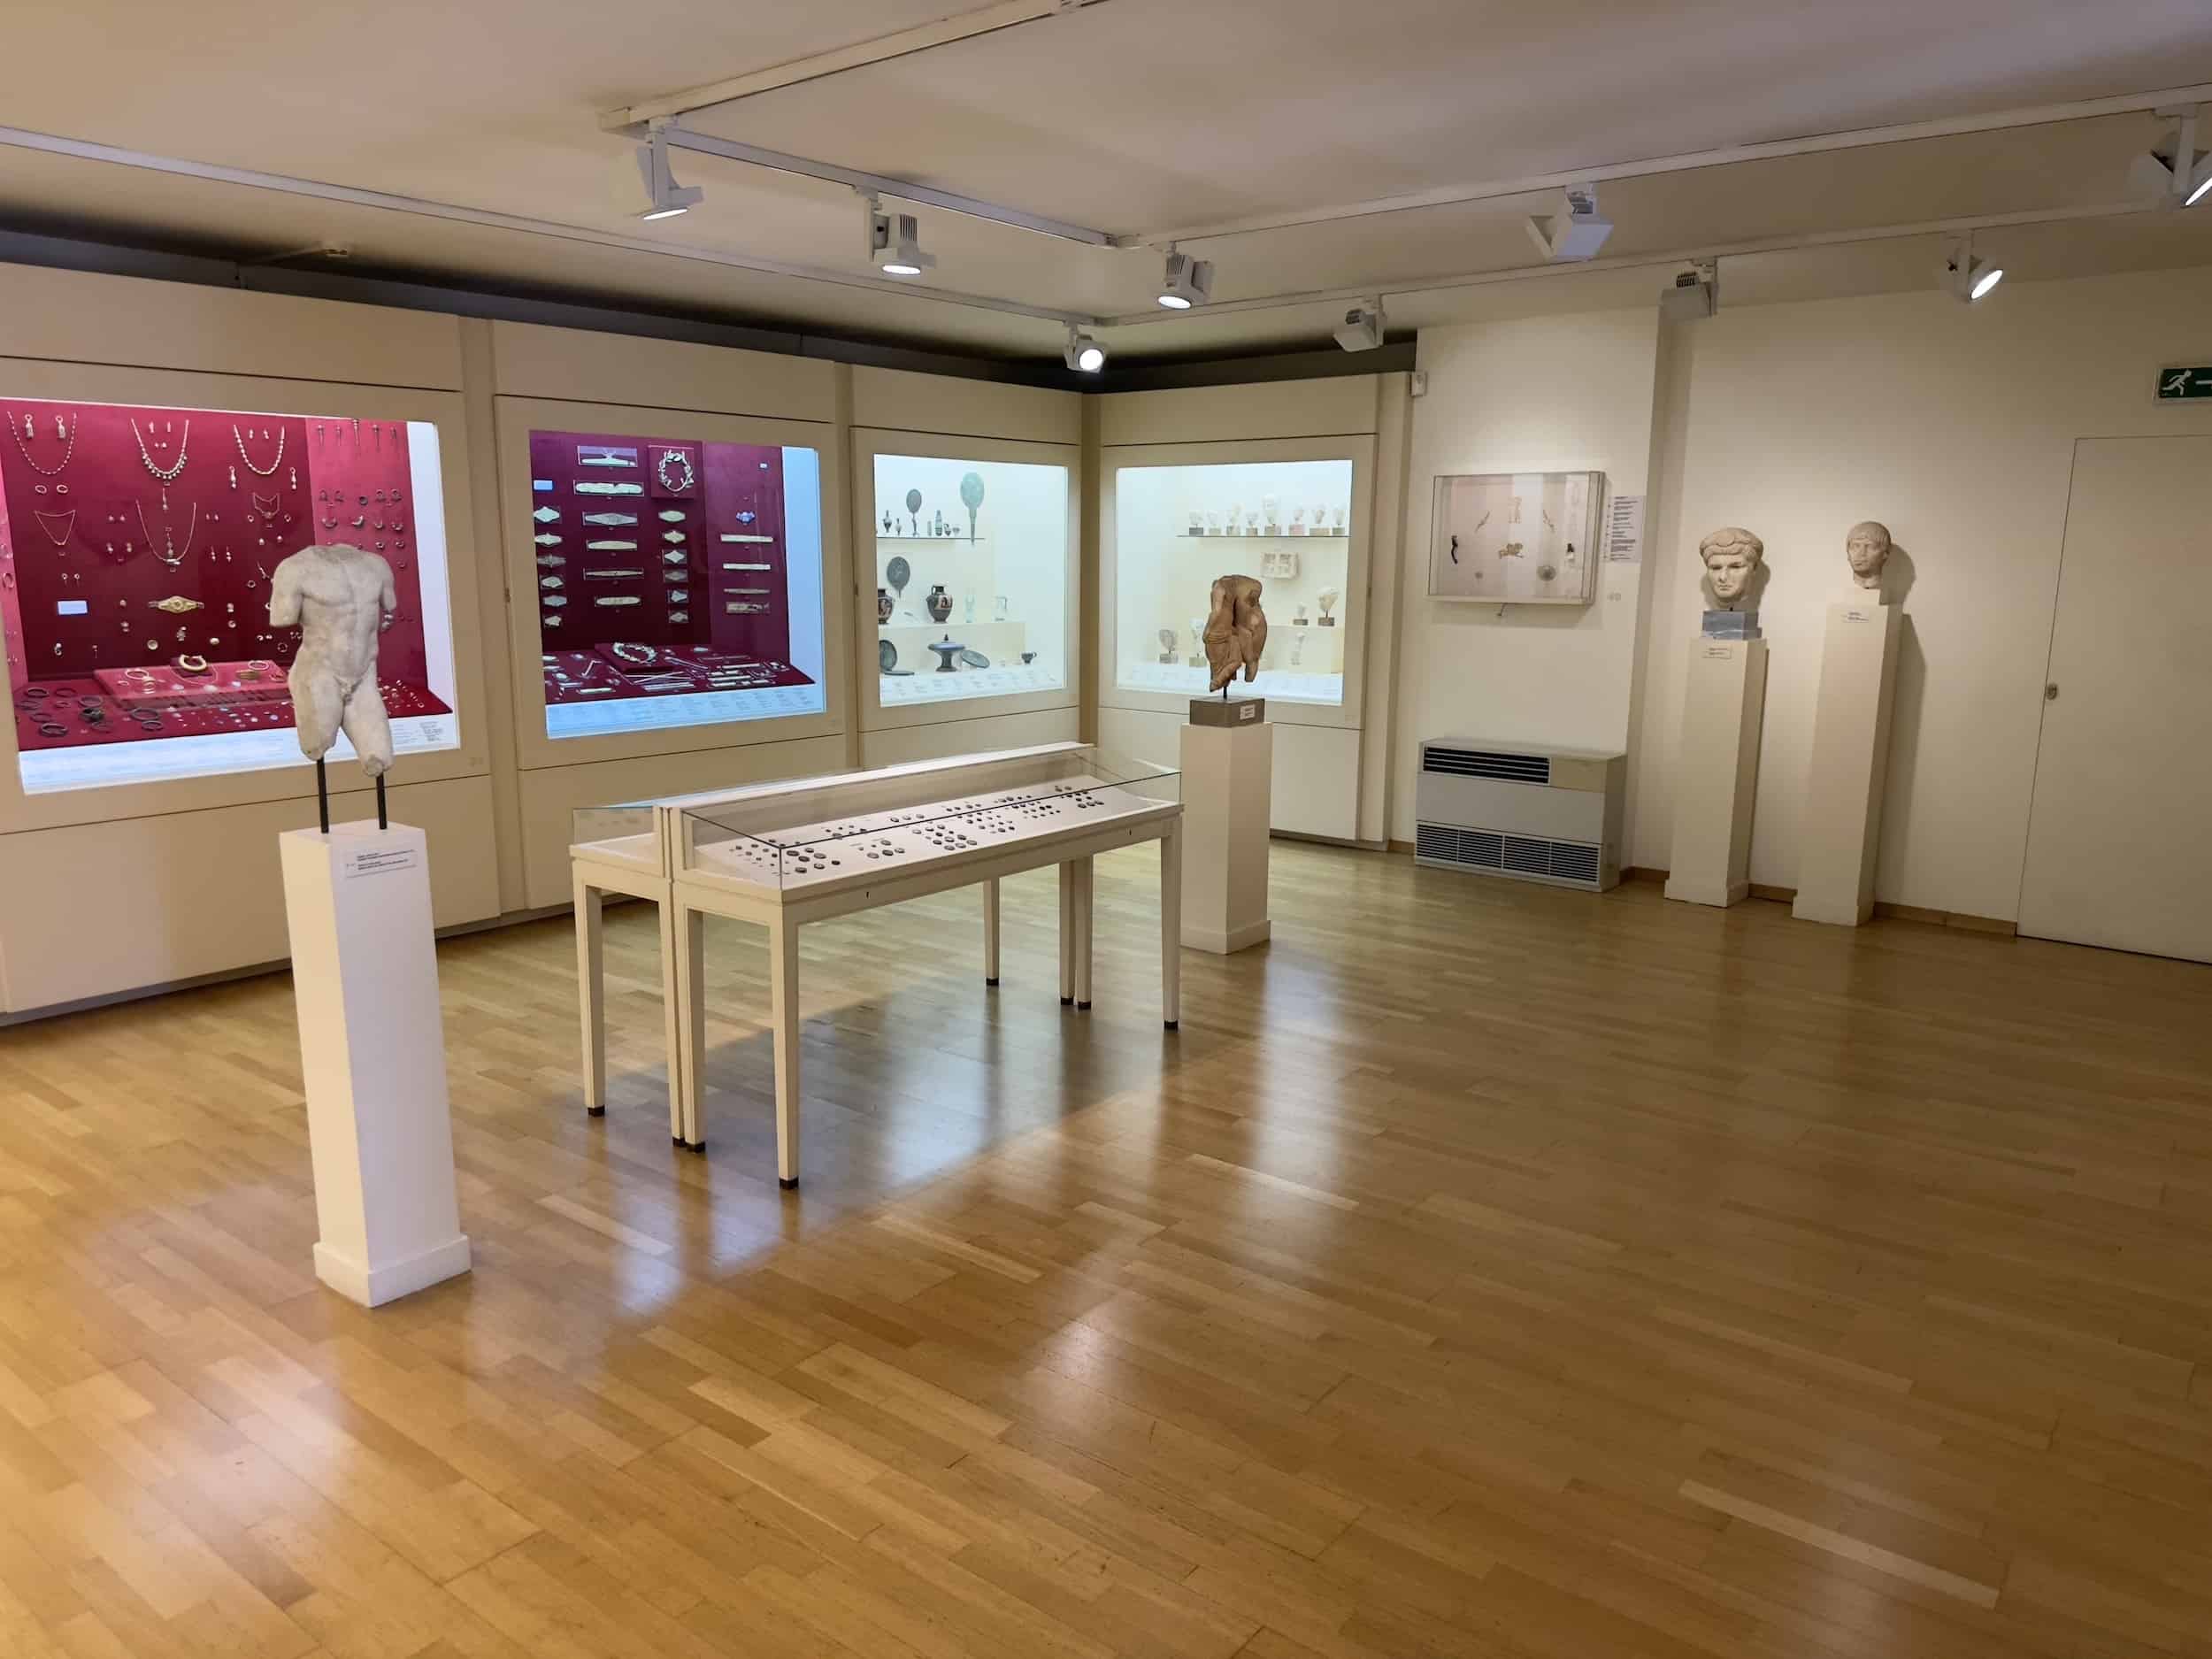 First gallery at the Canellopoulos Museum in Athens, Greece